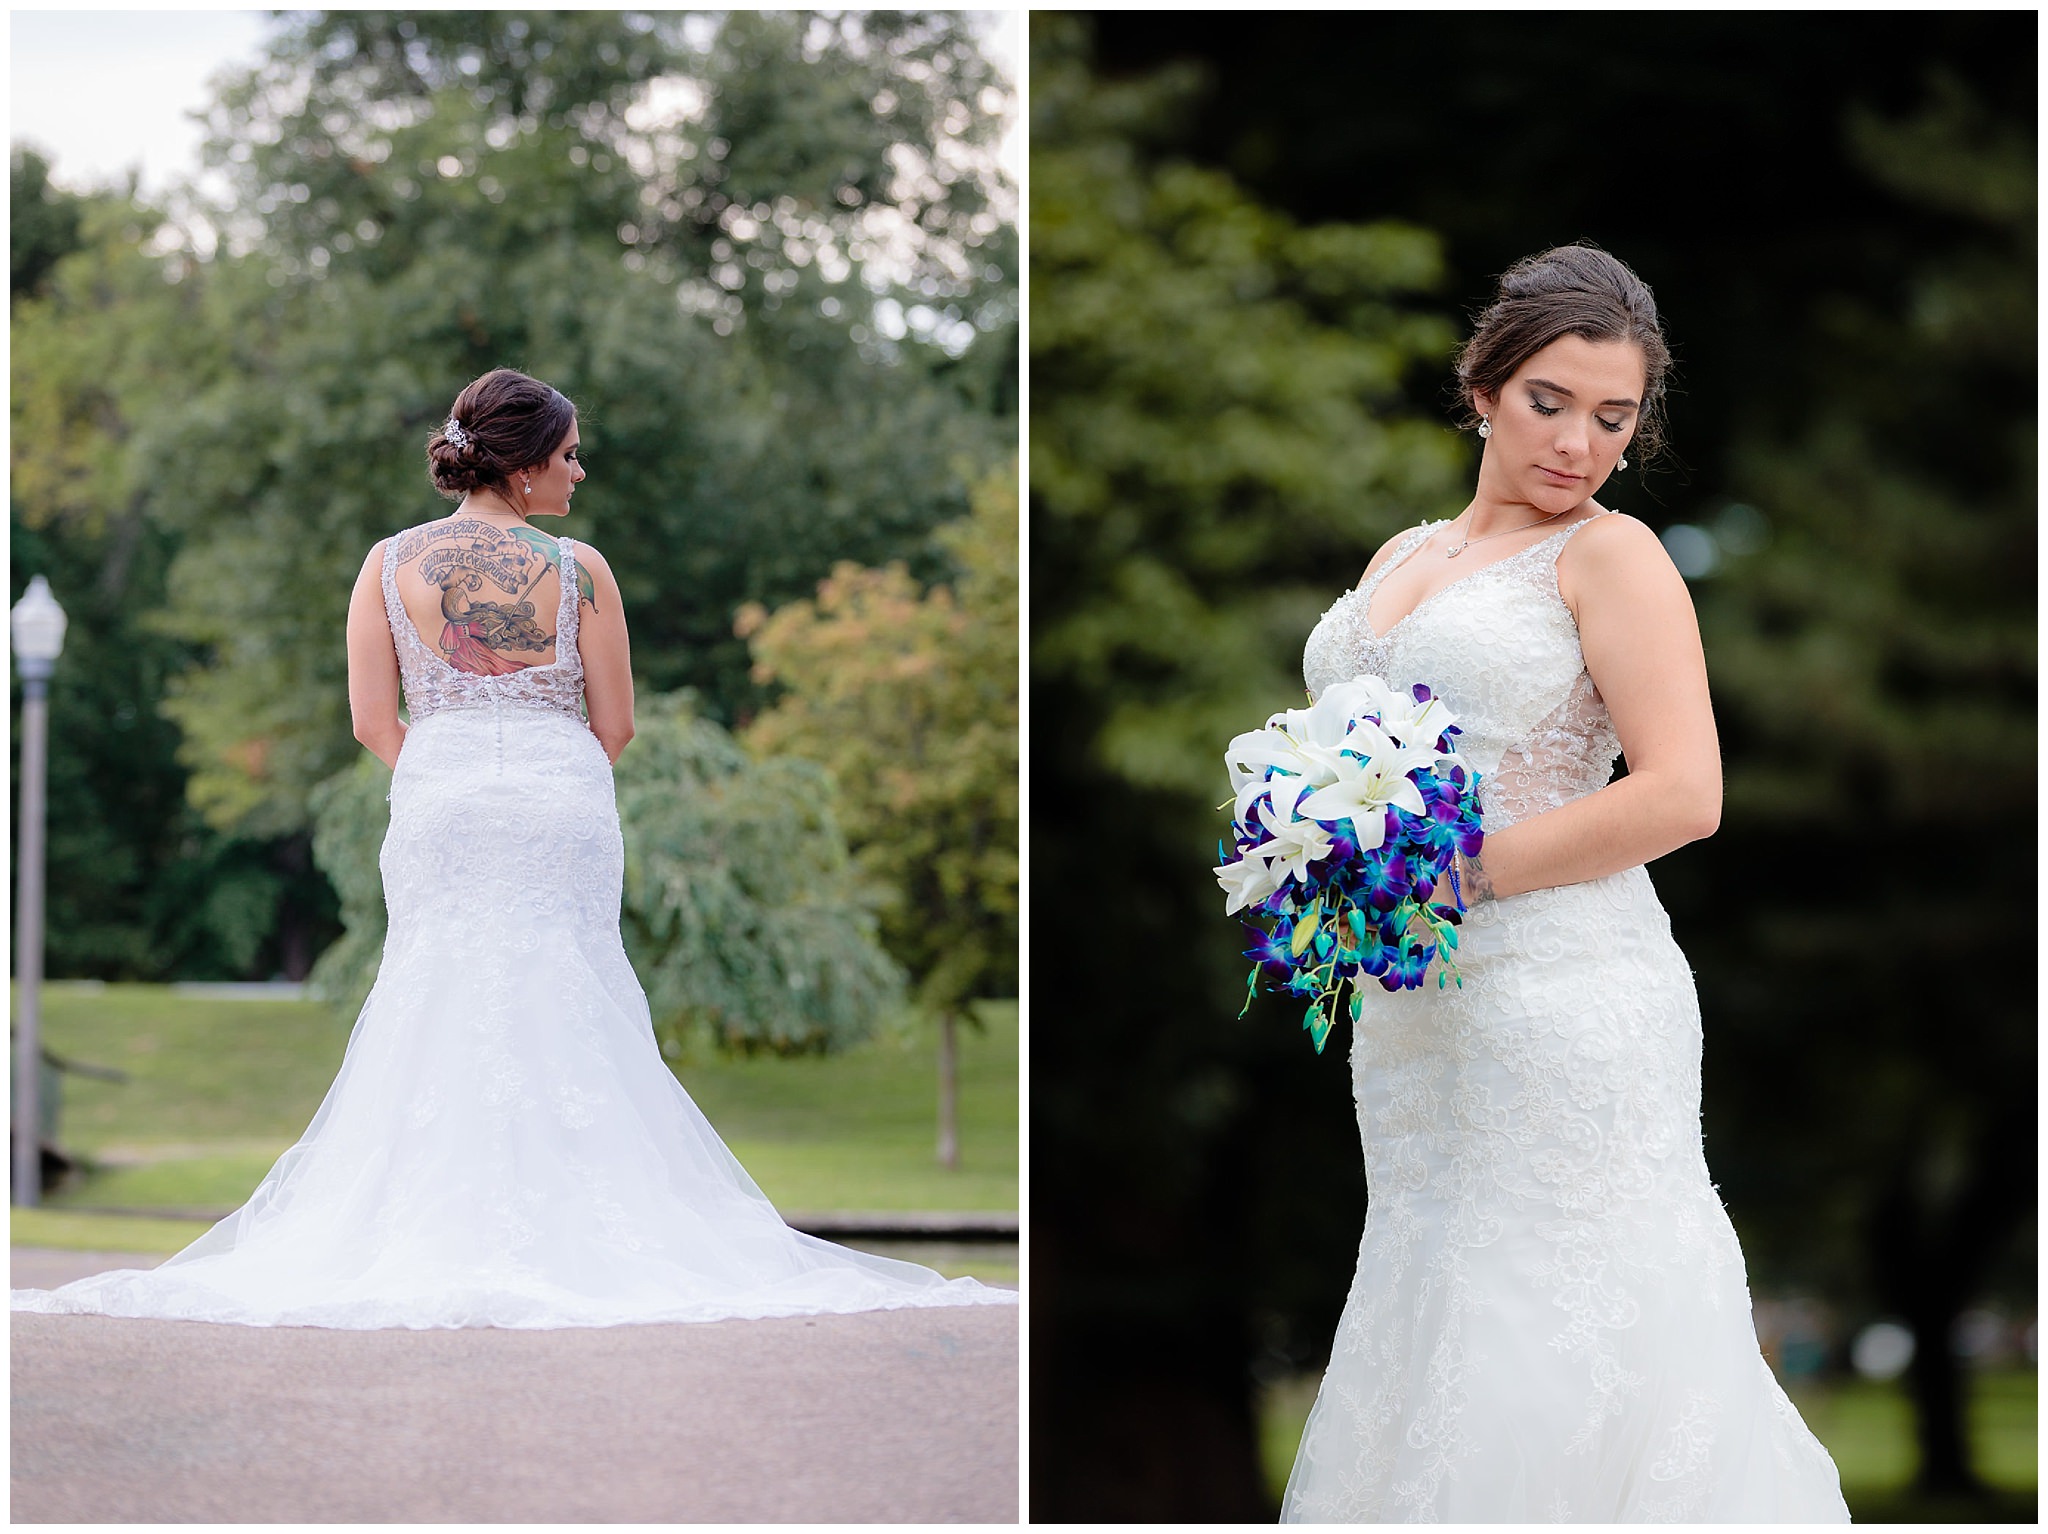 Bridal portraits in Allegheny Commons Park before a National Aviary wedding